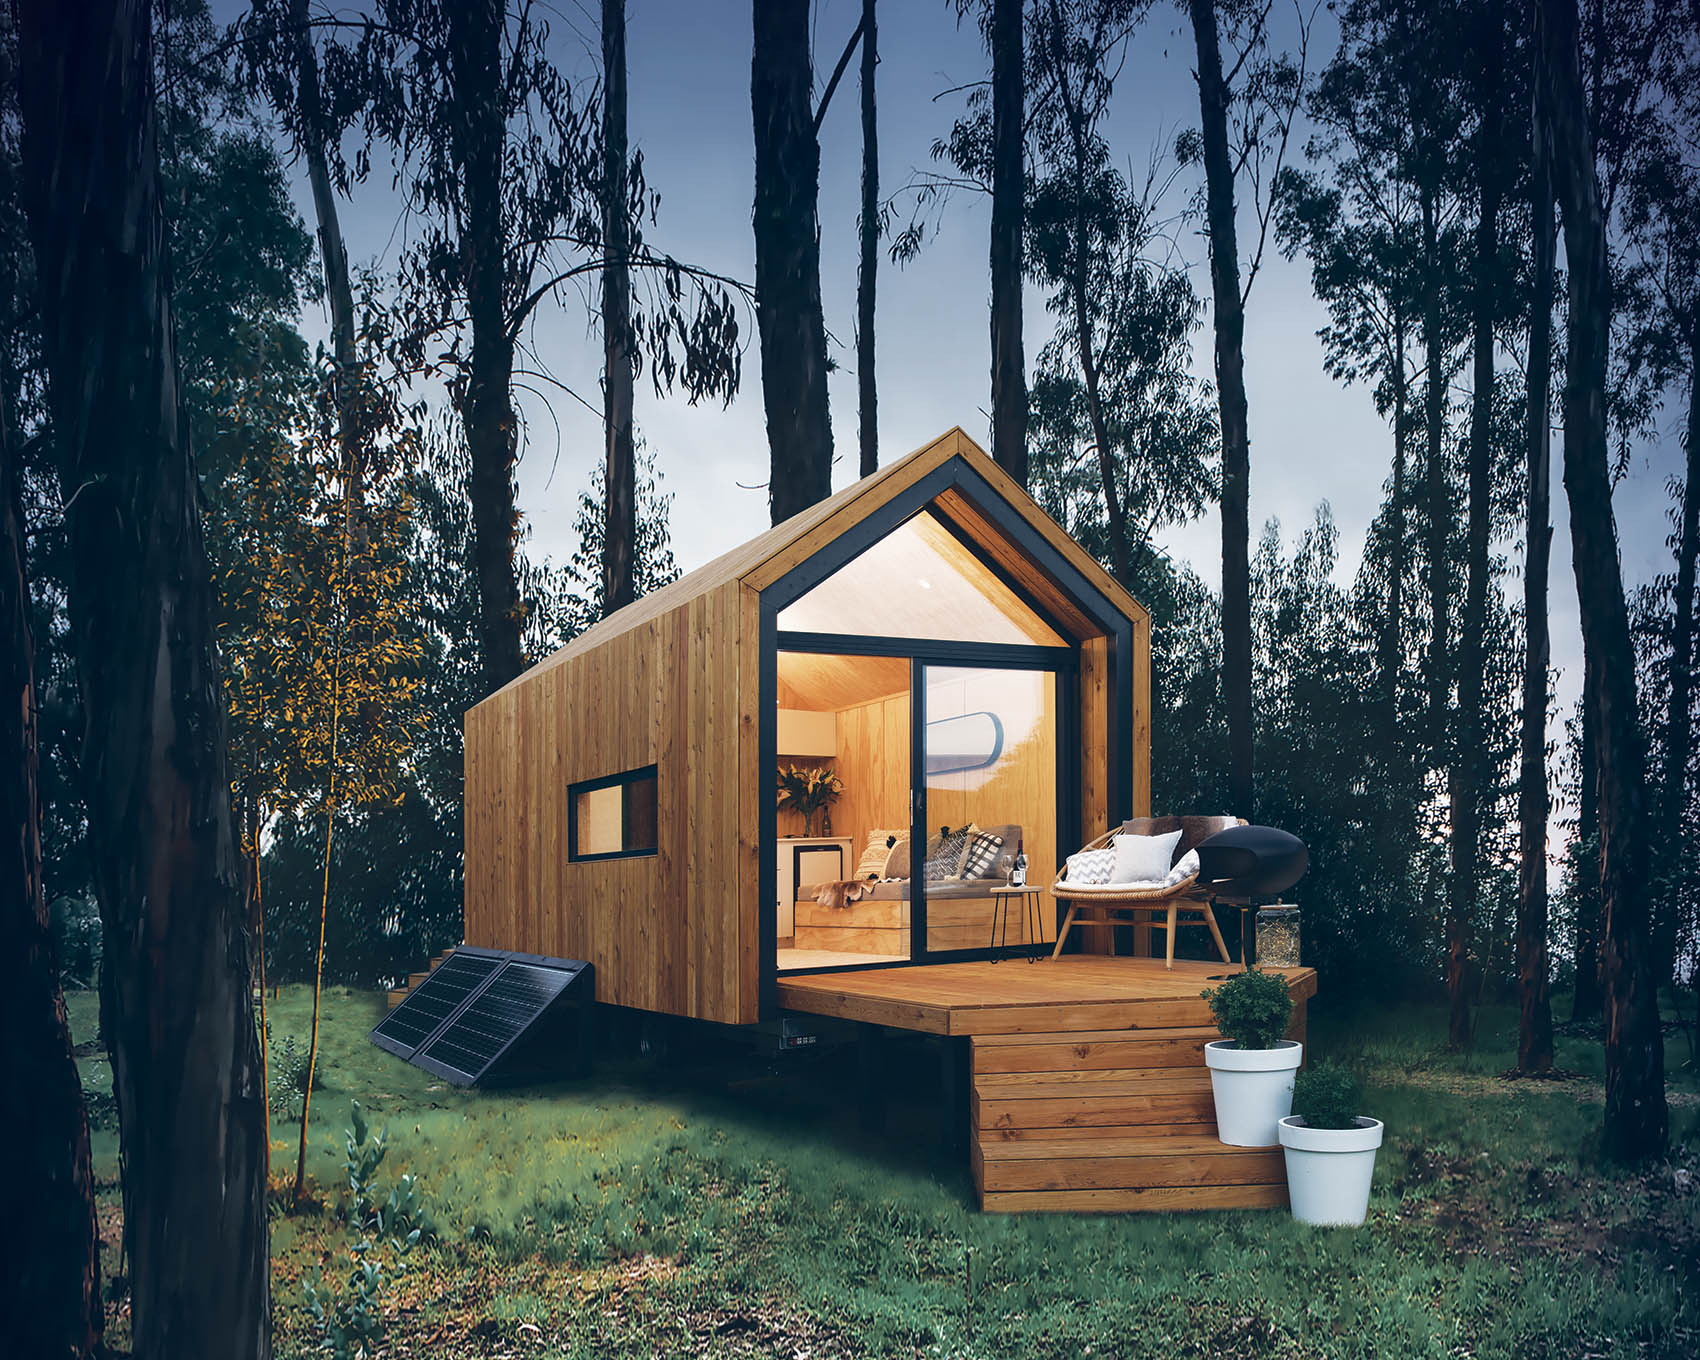 Seven Small Homes And Why The Tiny, Wooden Tiny Homes Nz